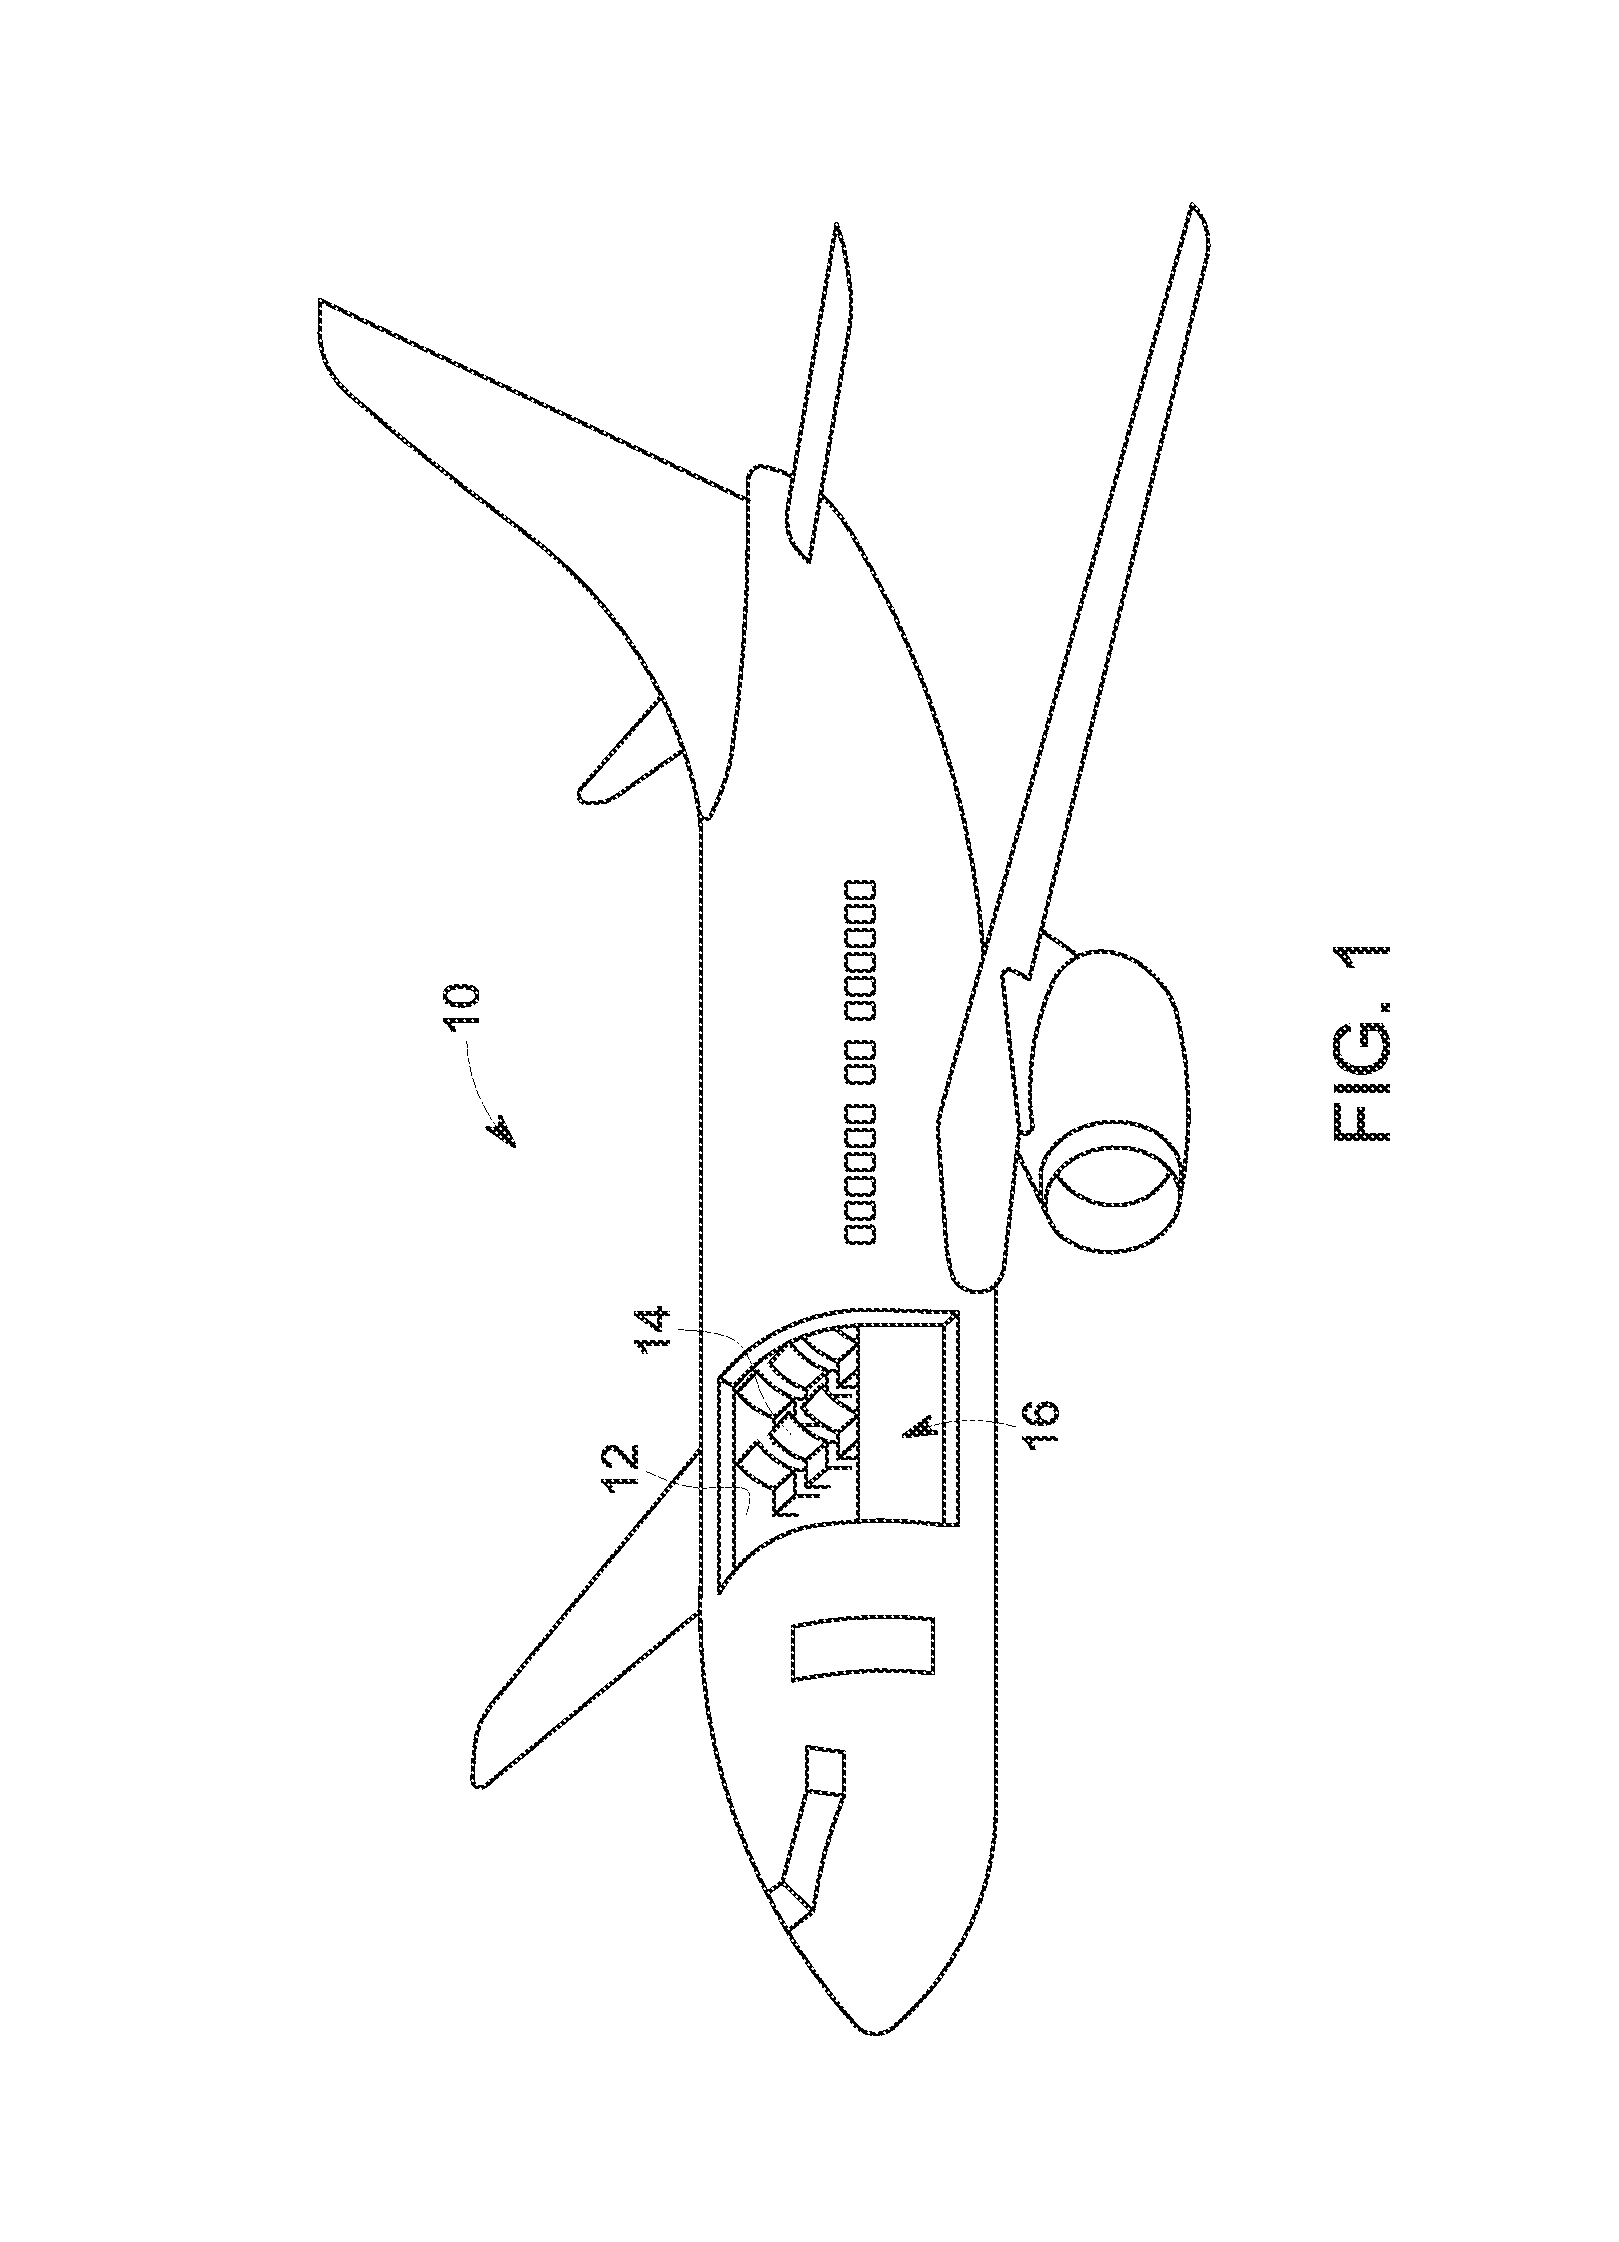 System and method for determining aircraft payloads to enhance profitability